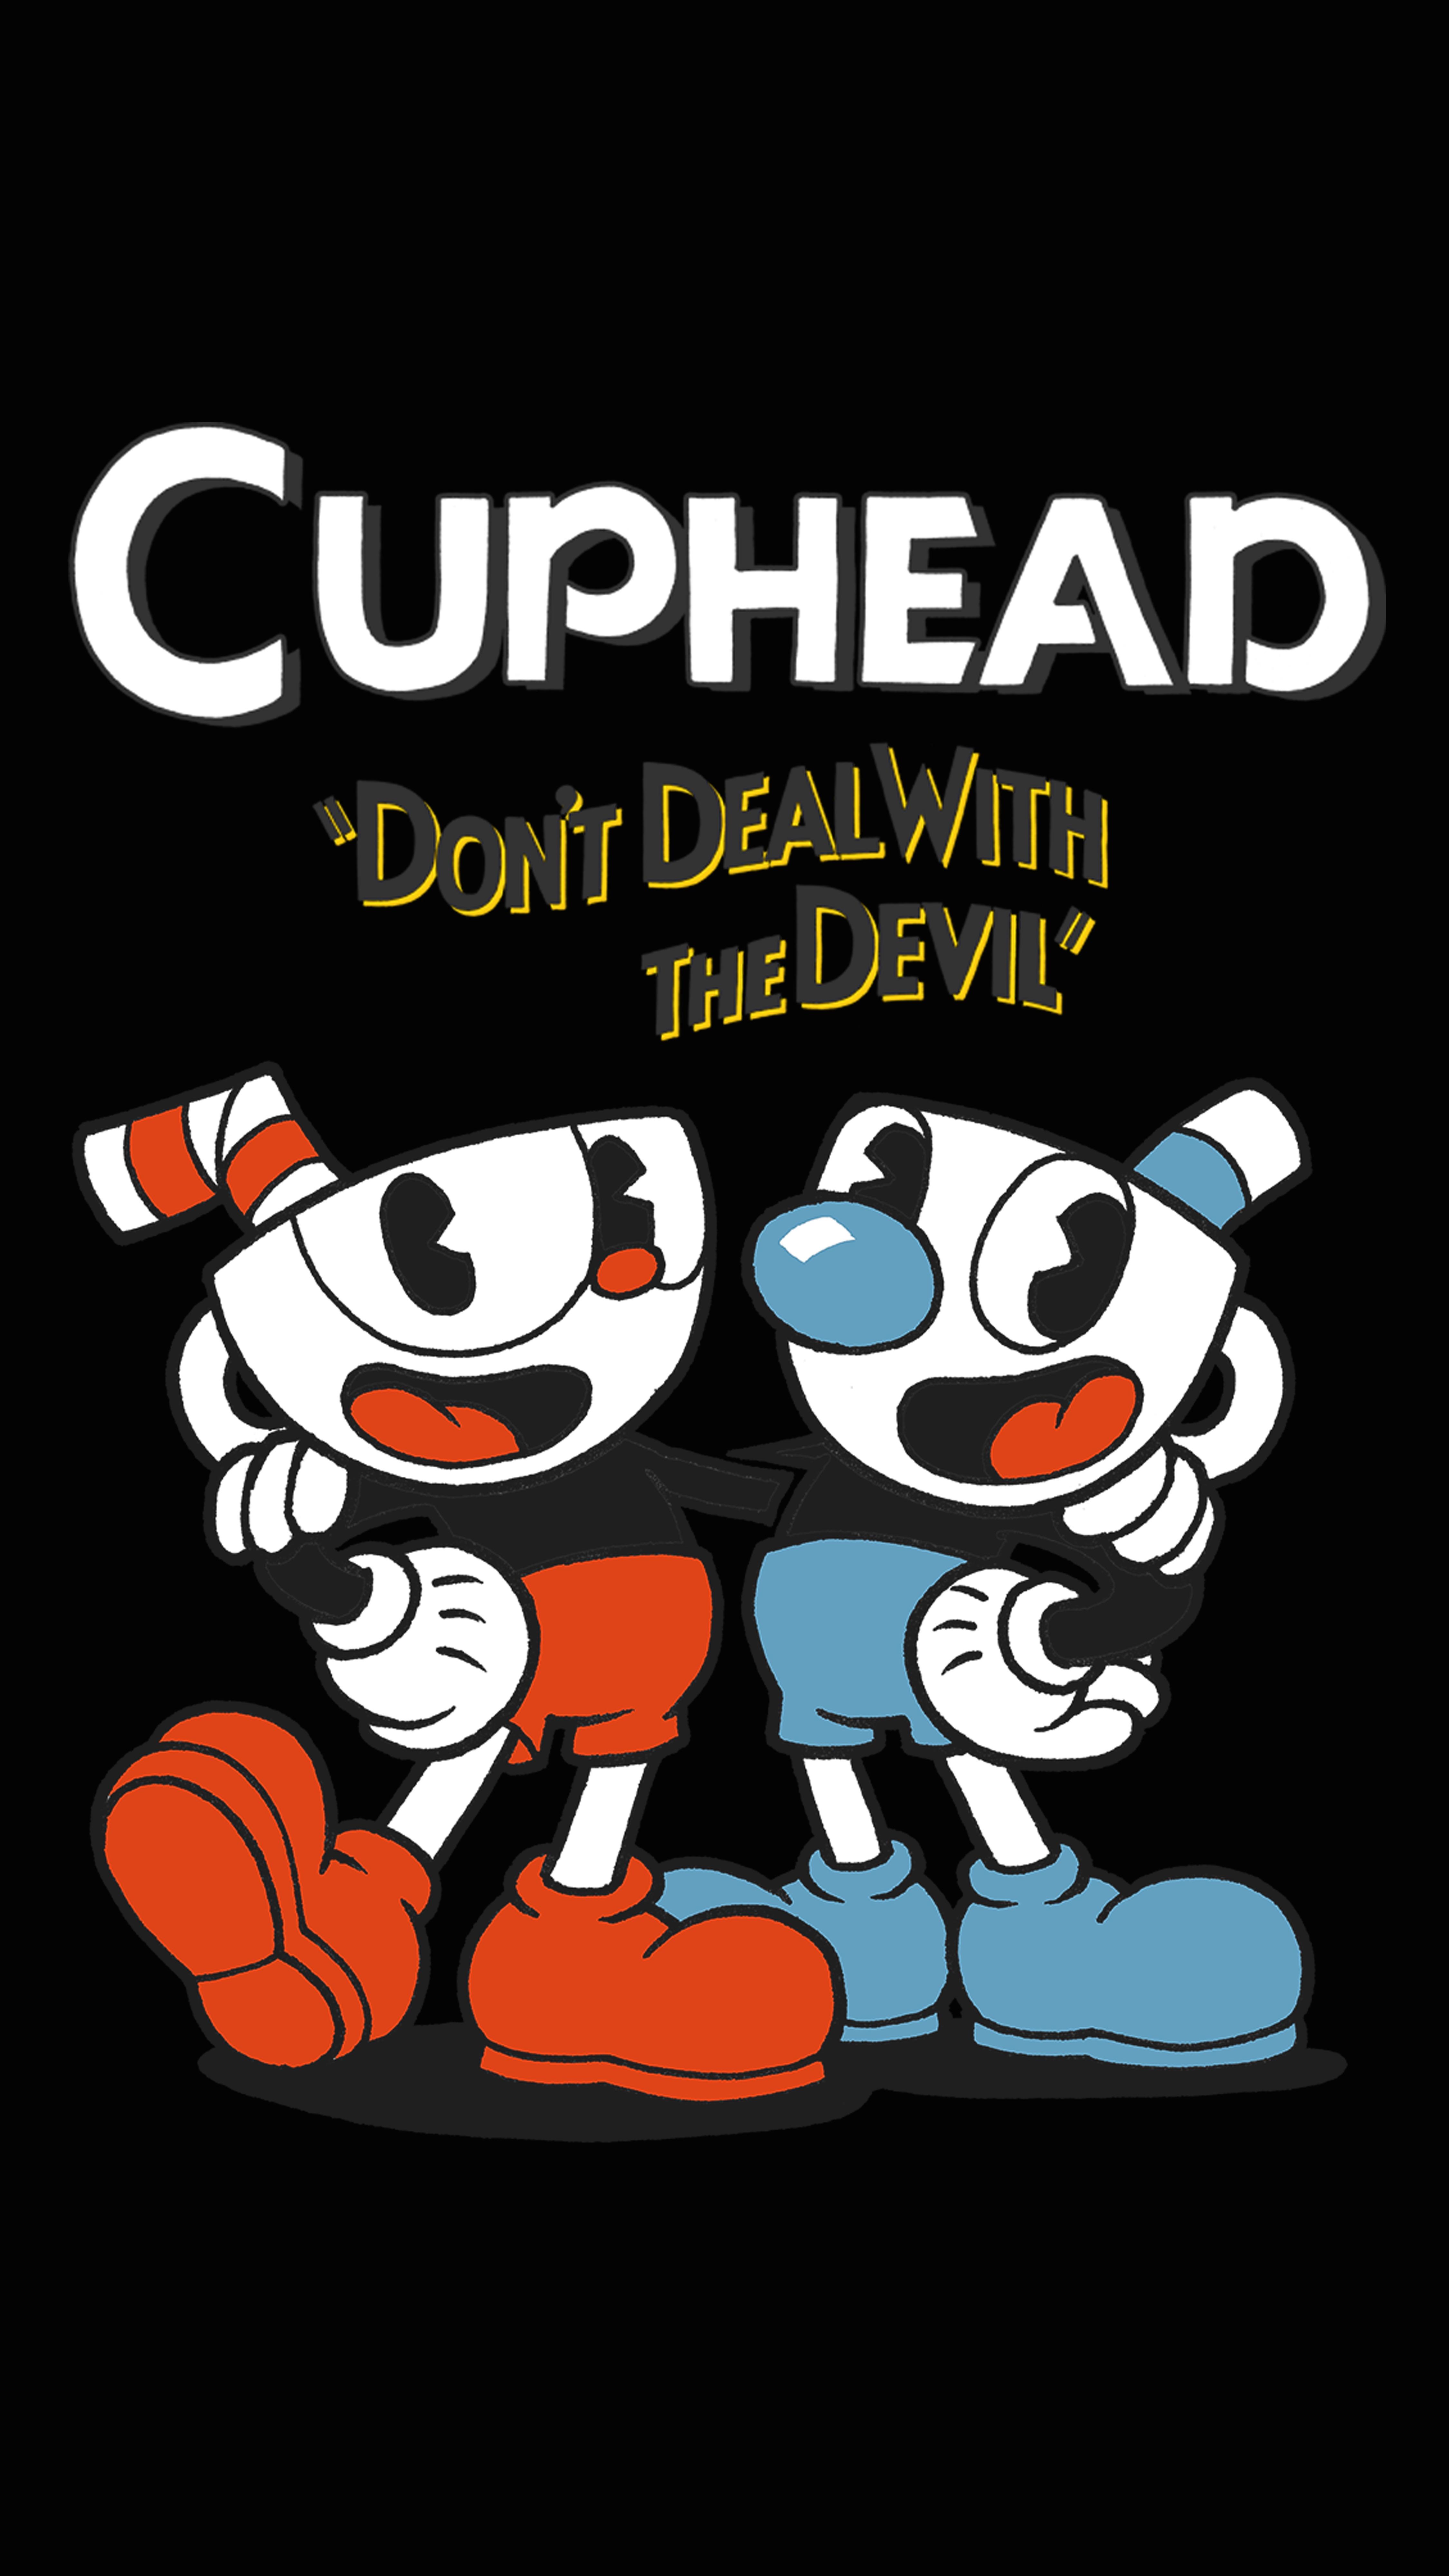 Cuphead Wallpaper Mobile by Mararia0w0 on DeviantArt